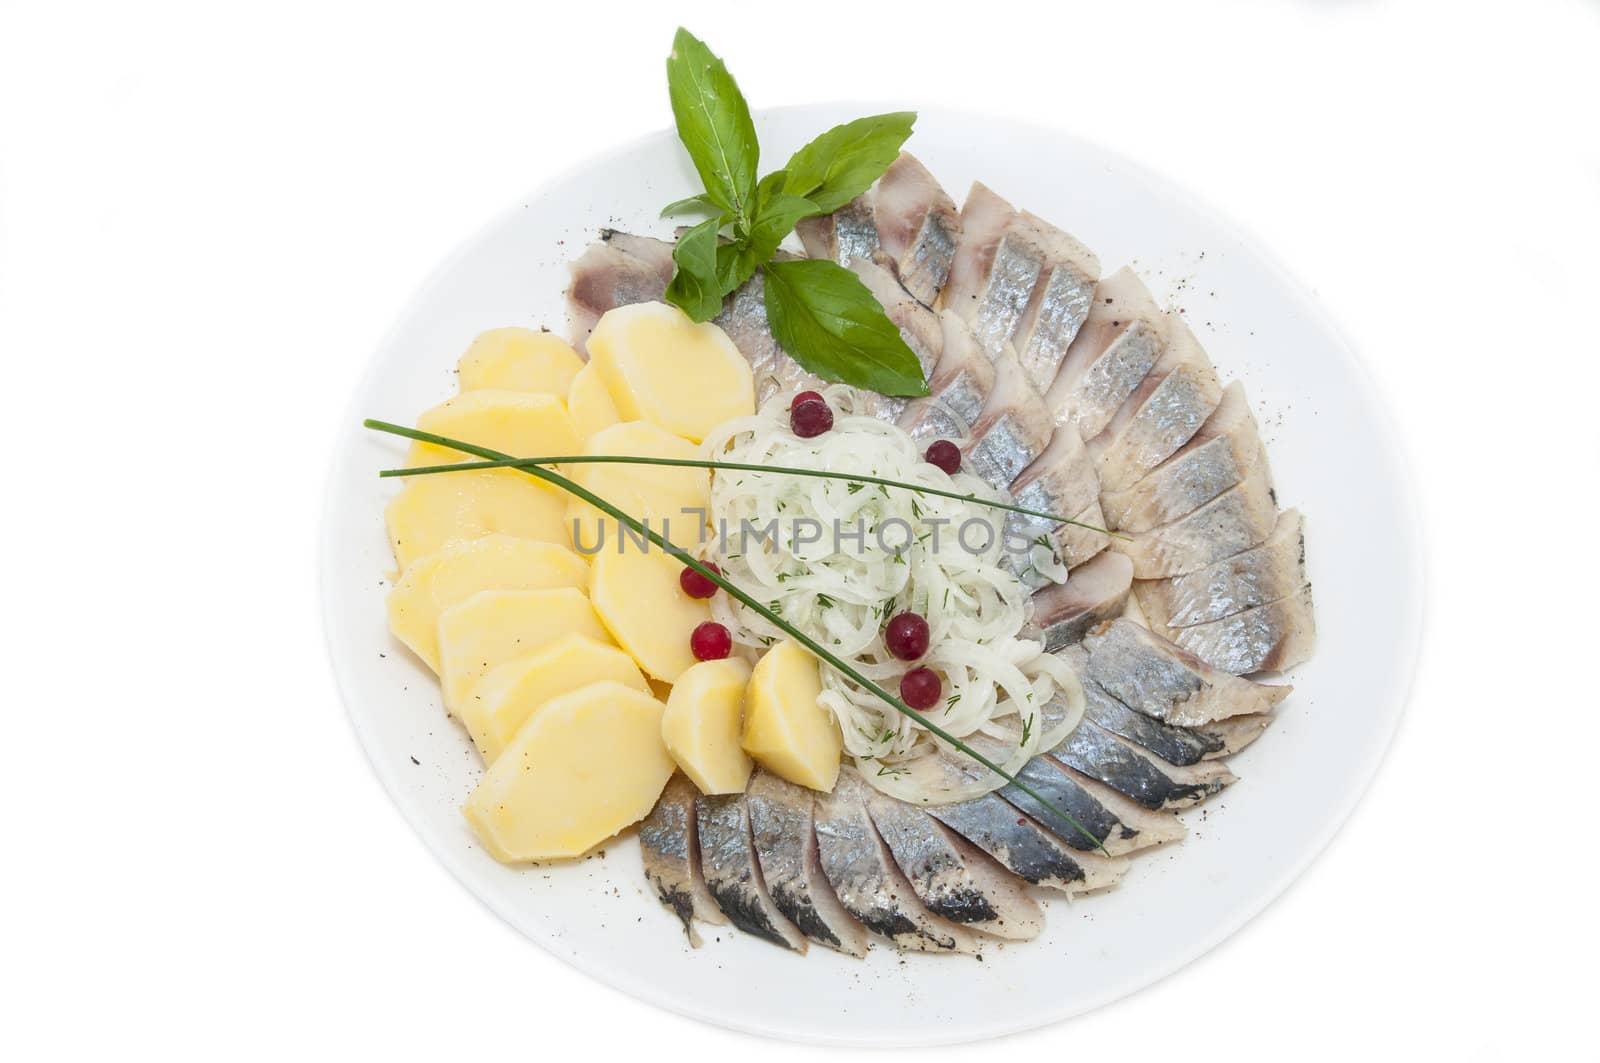 herring and potatoes on a white plate